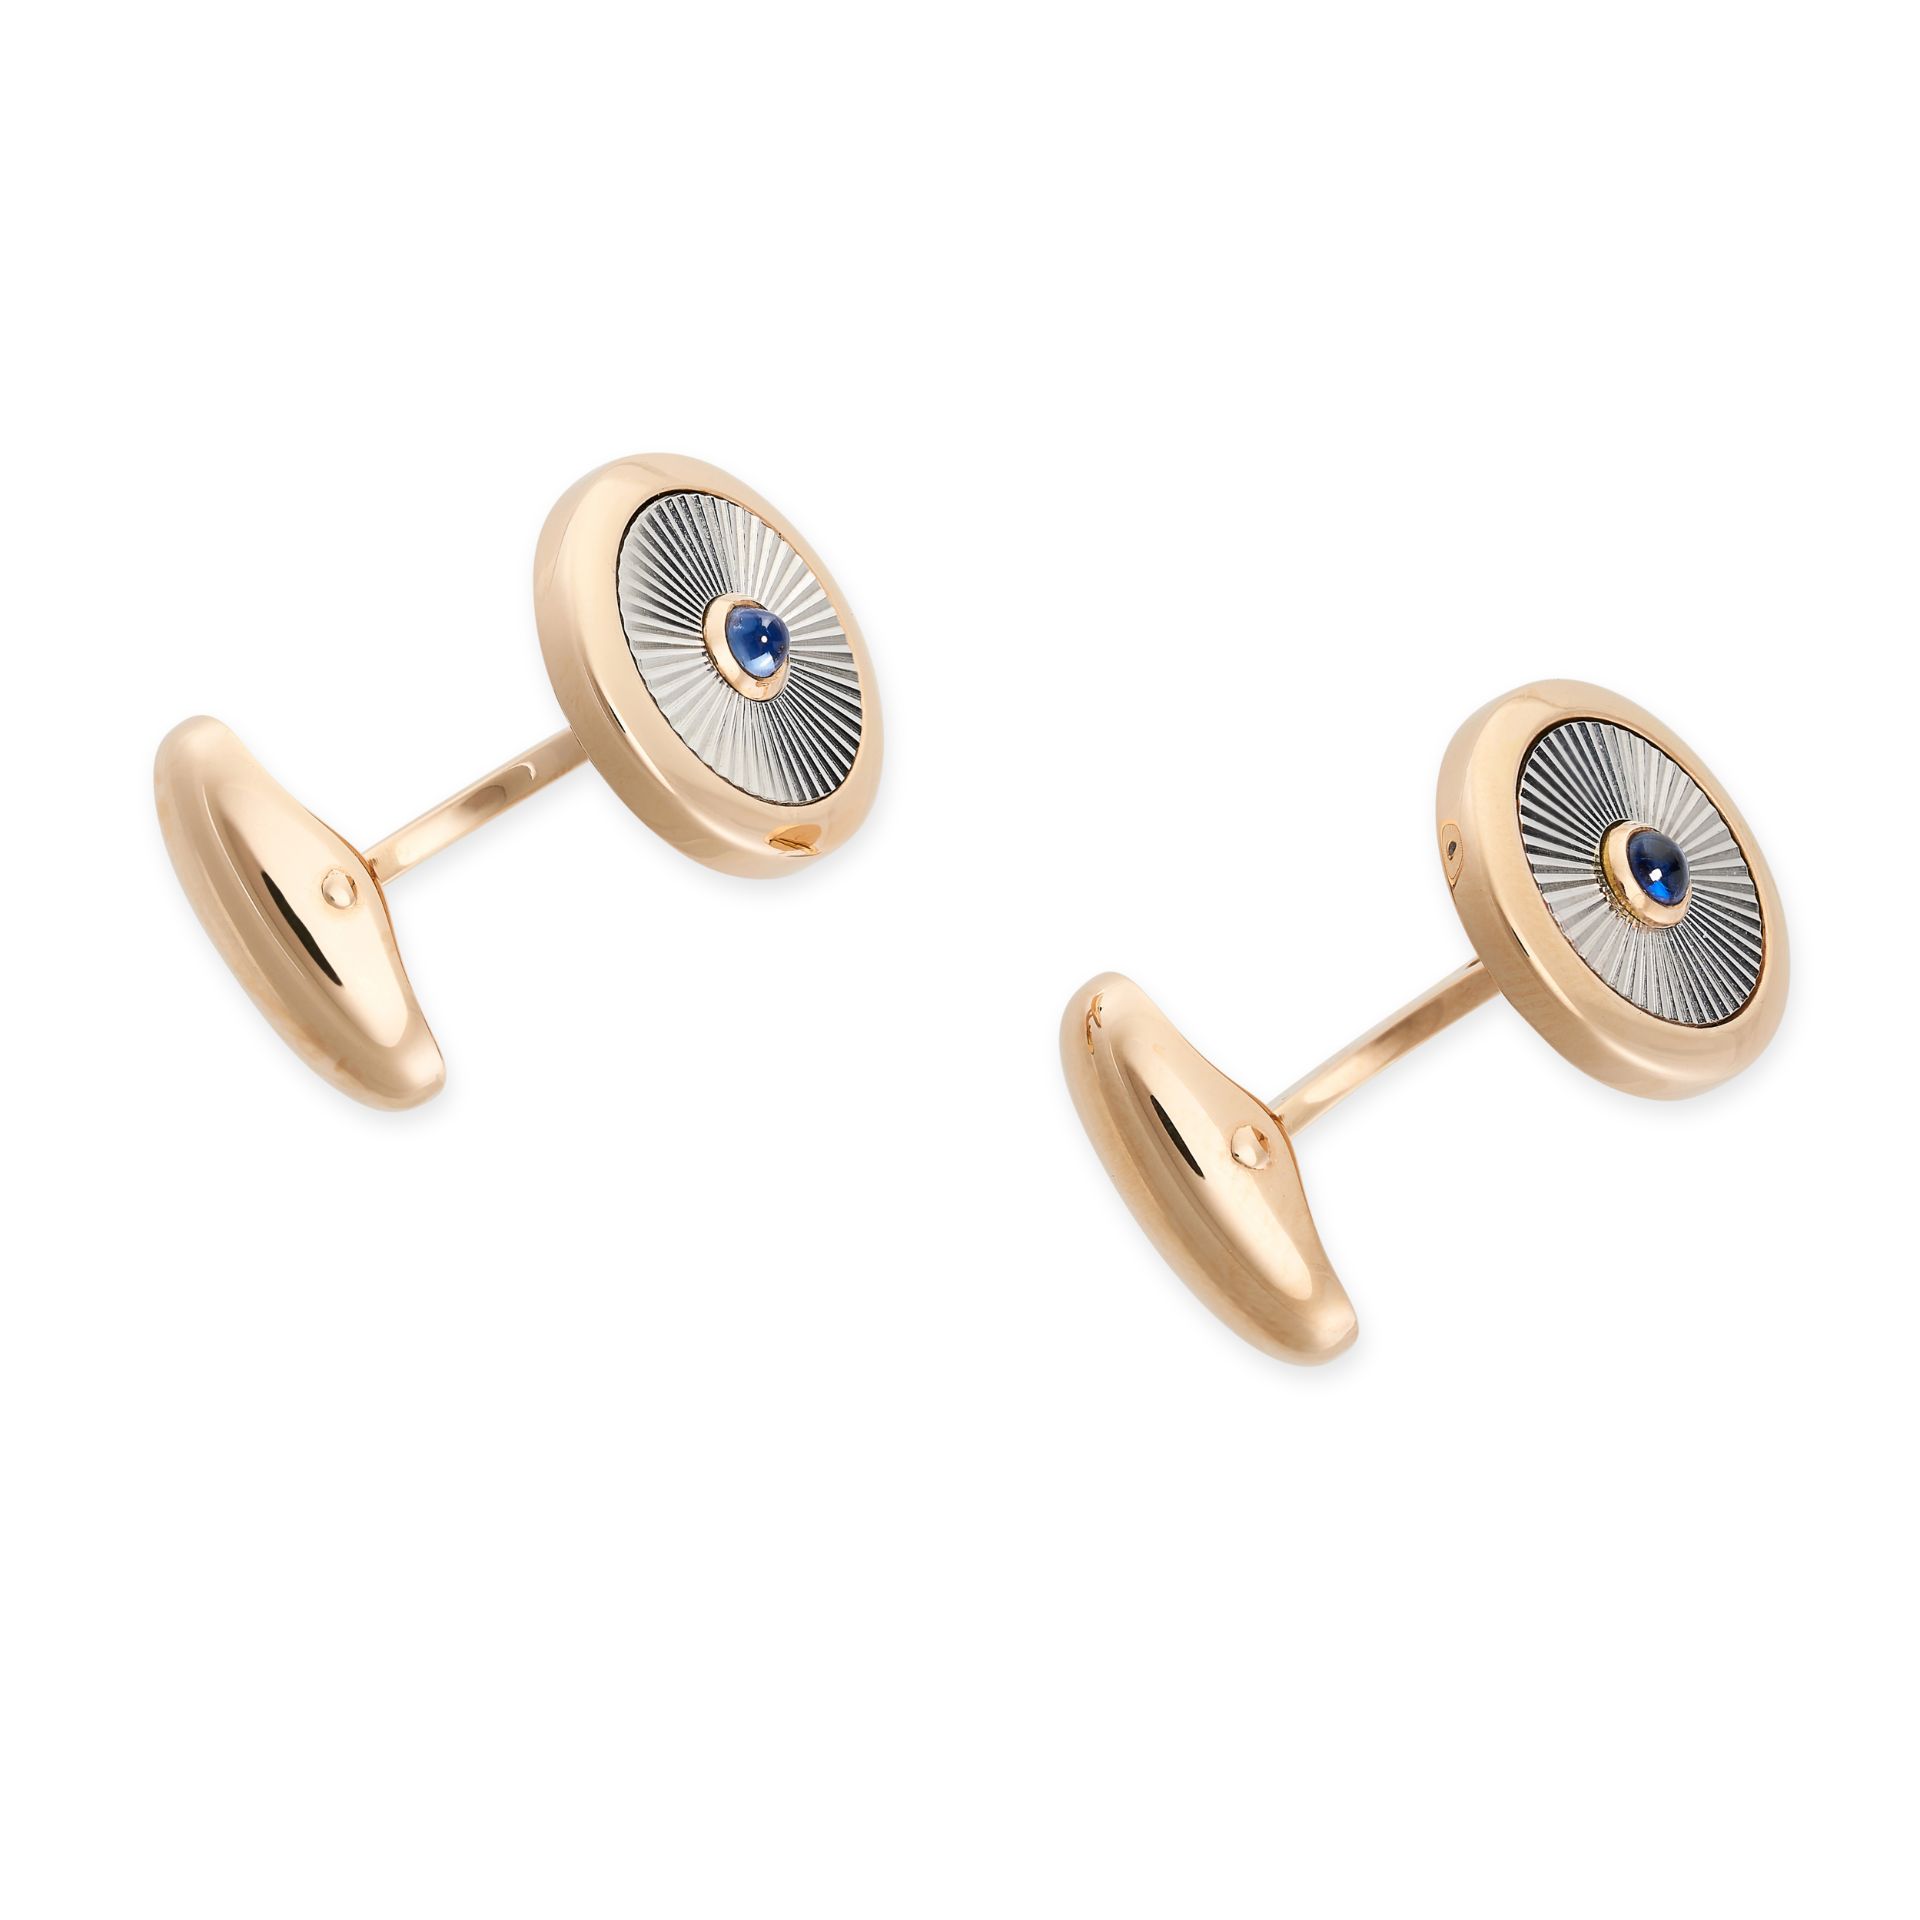 FABERGE, A PAIR OF SAPPHIRE CUFFLINKS in 18ct yellow and white gold, the circular faces set to the